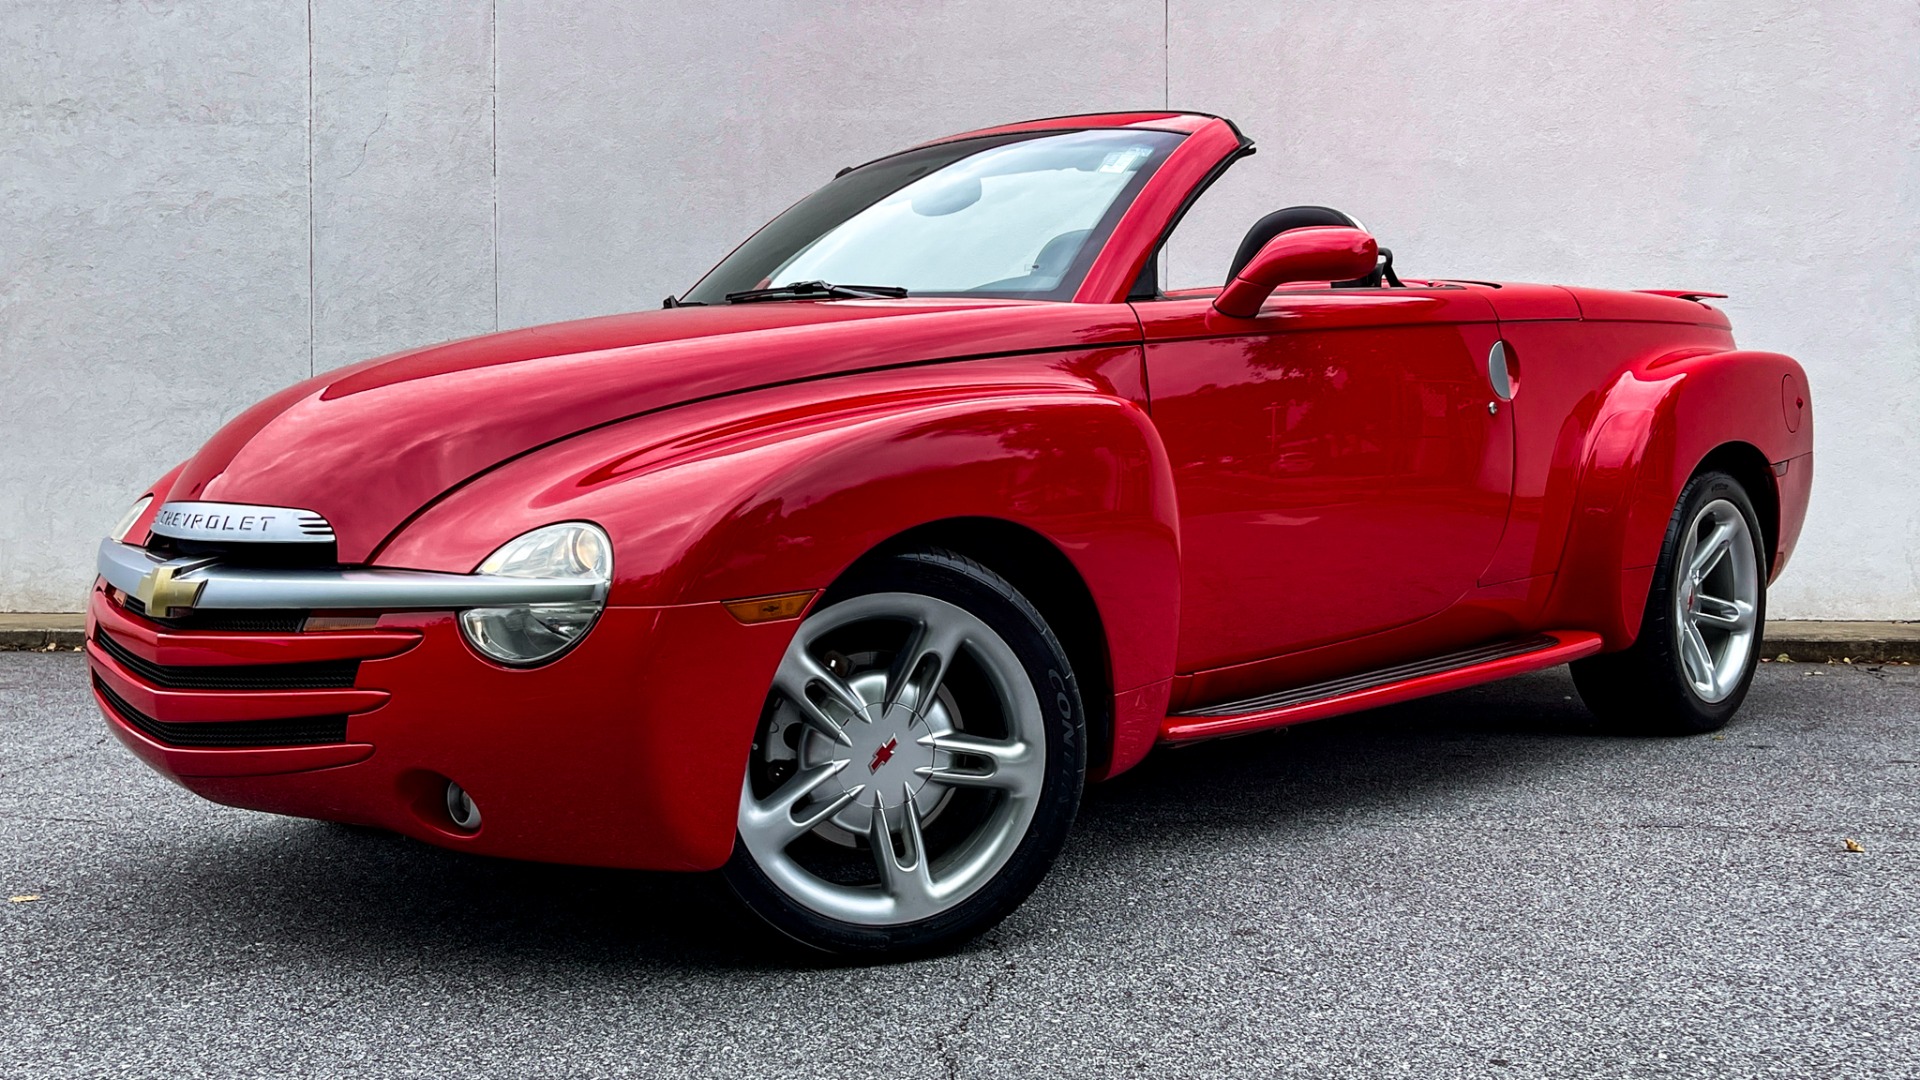 Used 2004 Chevrolet SSR LS / CONVERTIBLE / 5.3L V8 / LEATHER / HEATED SEATS / BACKUP CAMERA for sale $19,995 at Formula Imports in Charlotte NC 28227 1